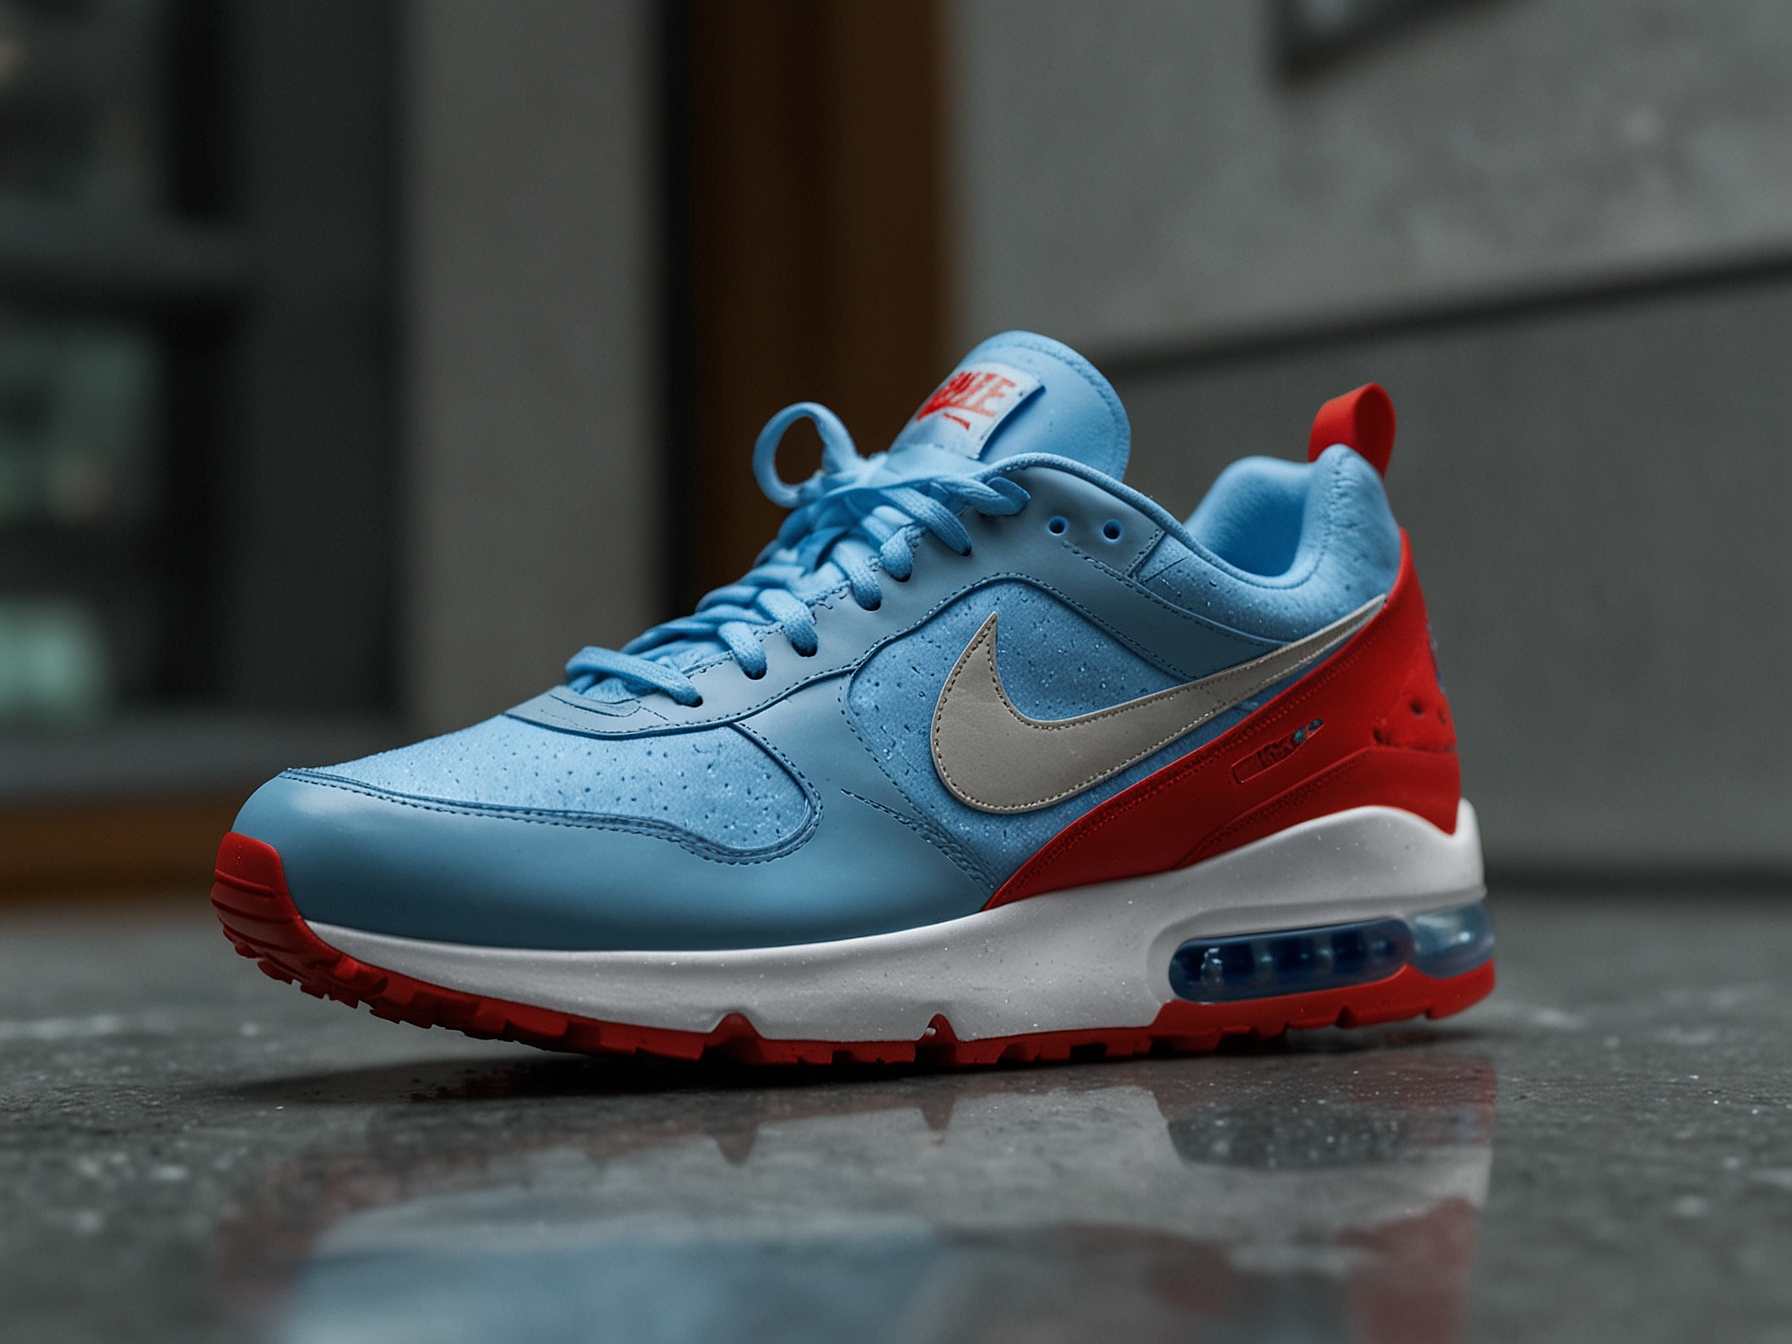 The Nike Sabrina 2 'Conductor', featuring an icy blue-grey colorway with a blue chrome 'S' logo on the tongue and a hot red Swoosh at the outsole, showcased at Nike's NYC headquarters.